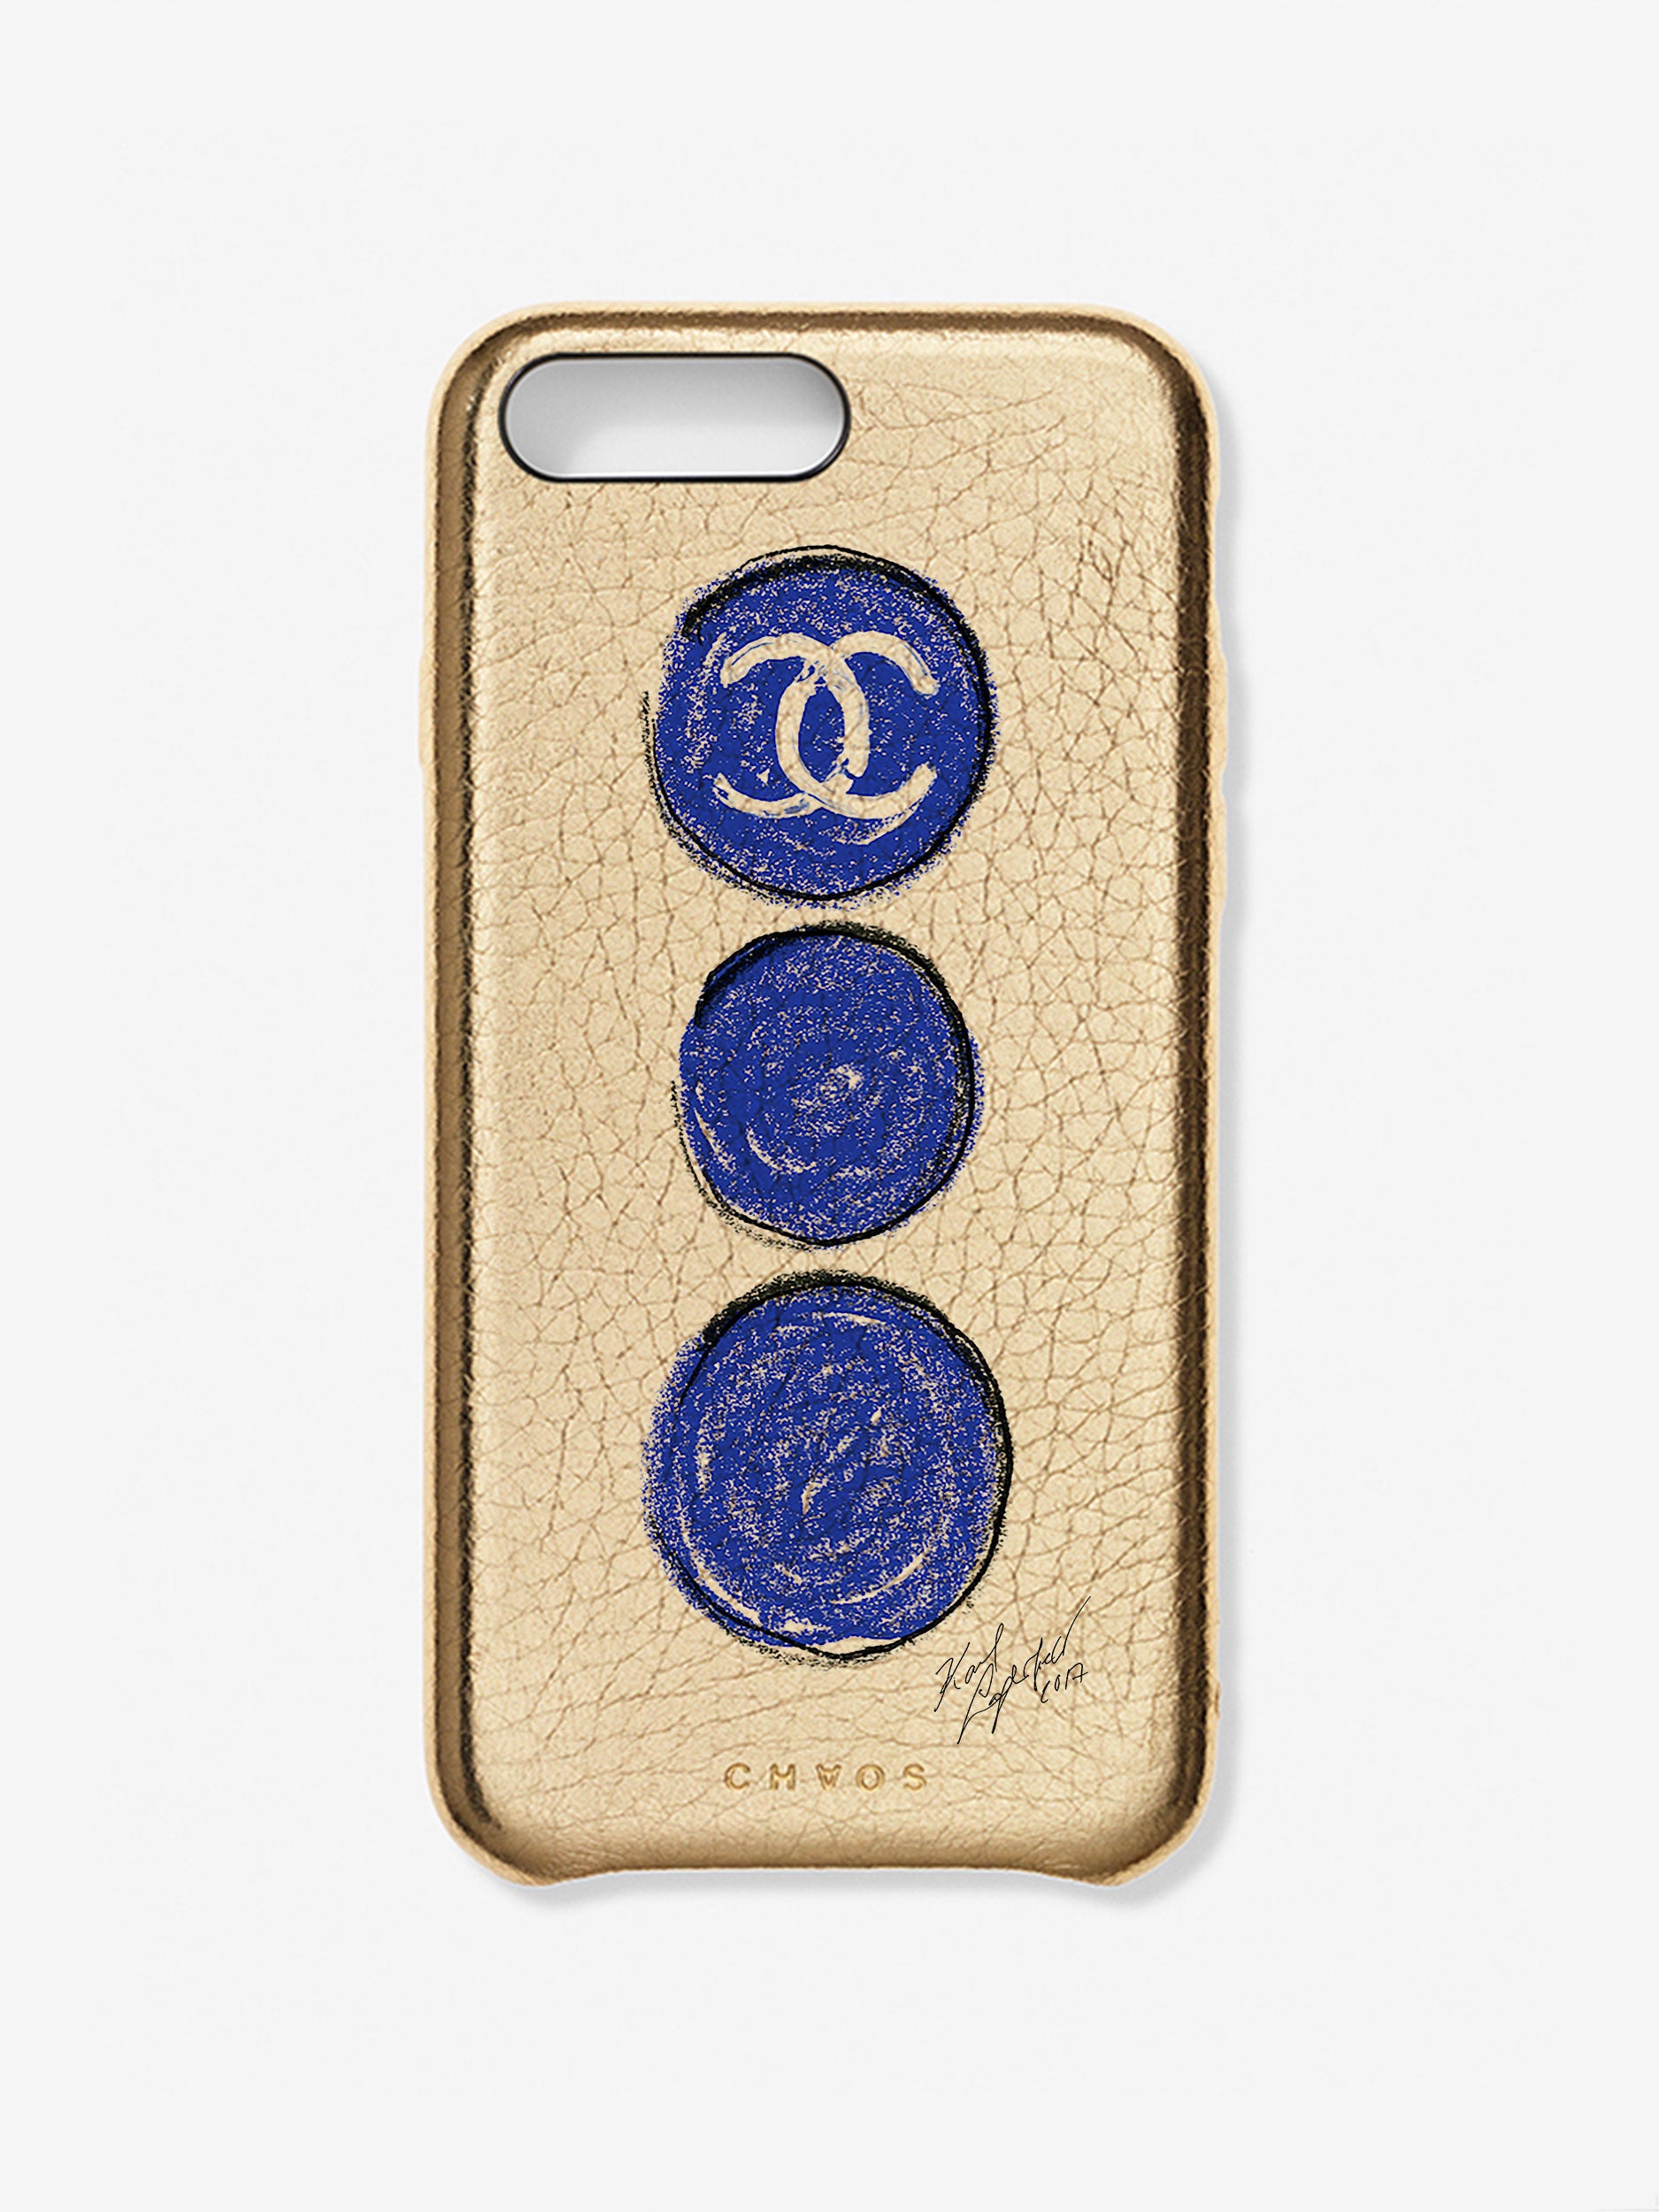 Chaos X Chanel X Colette Gold Iphone Case Phone Case Chaos Club